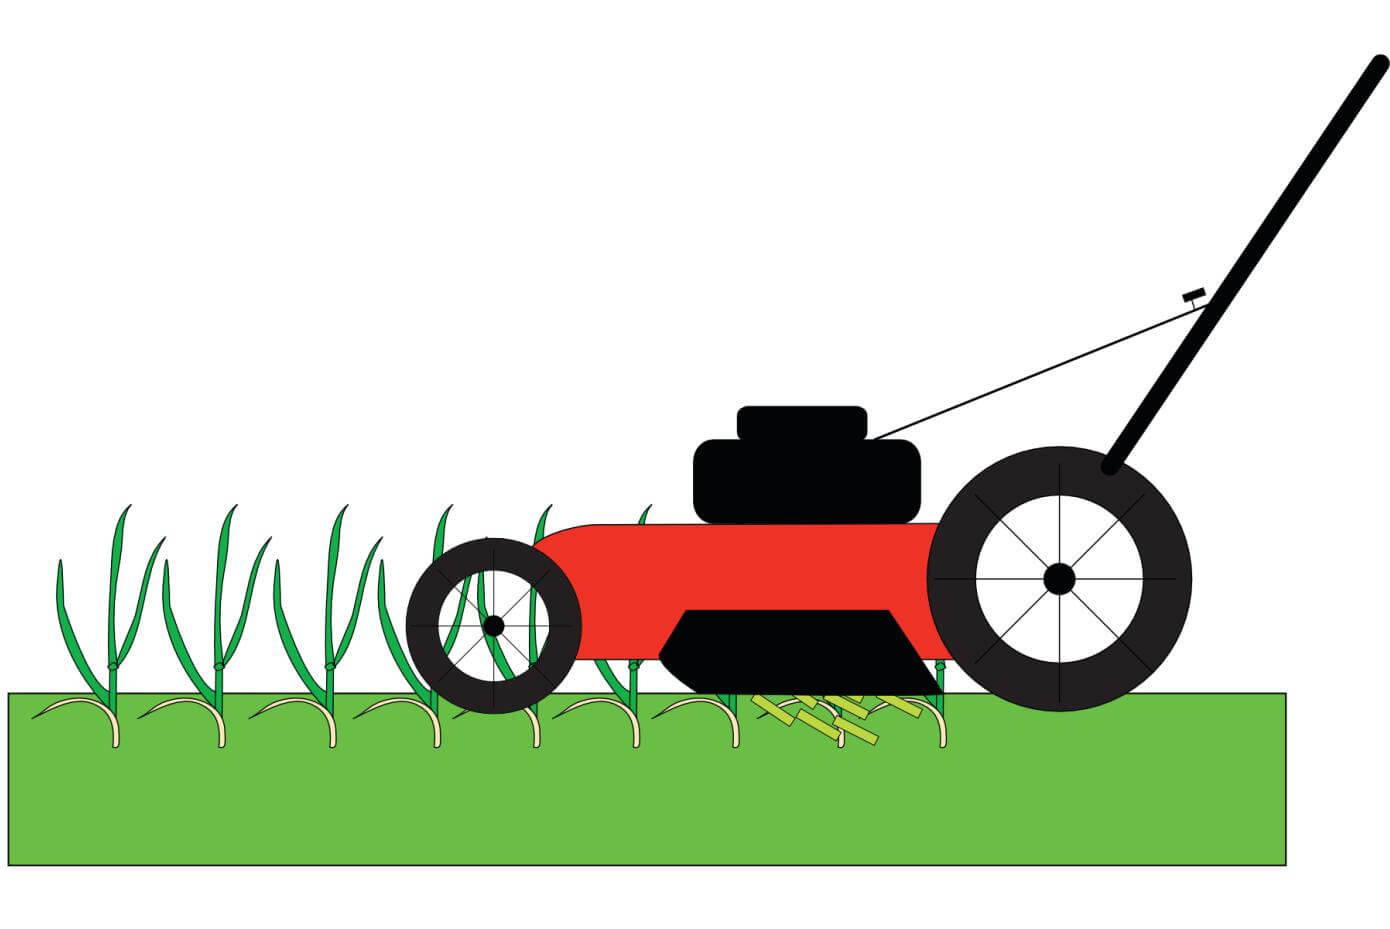 Illustration of a lawn mower mowing grass.